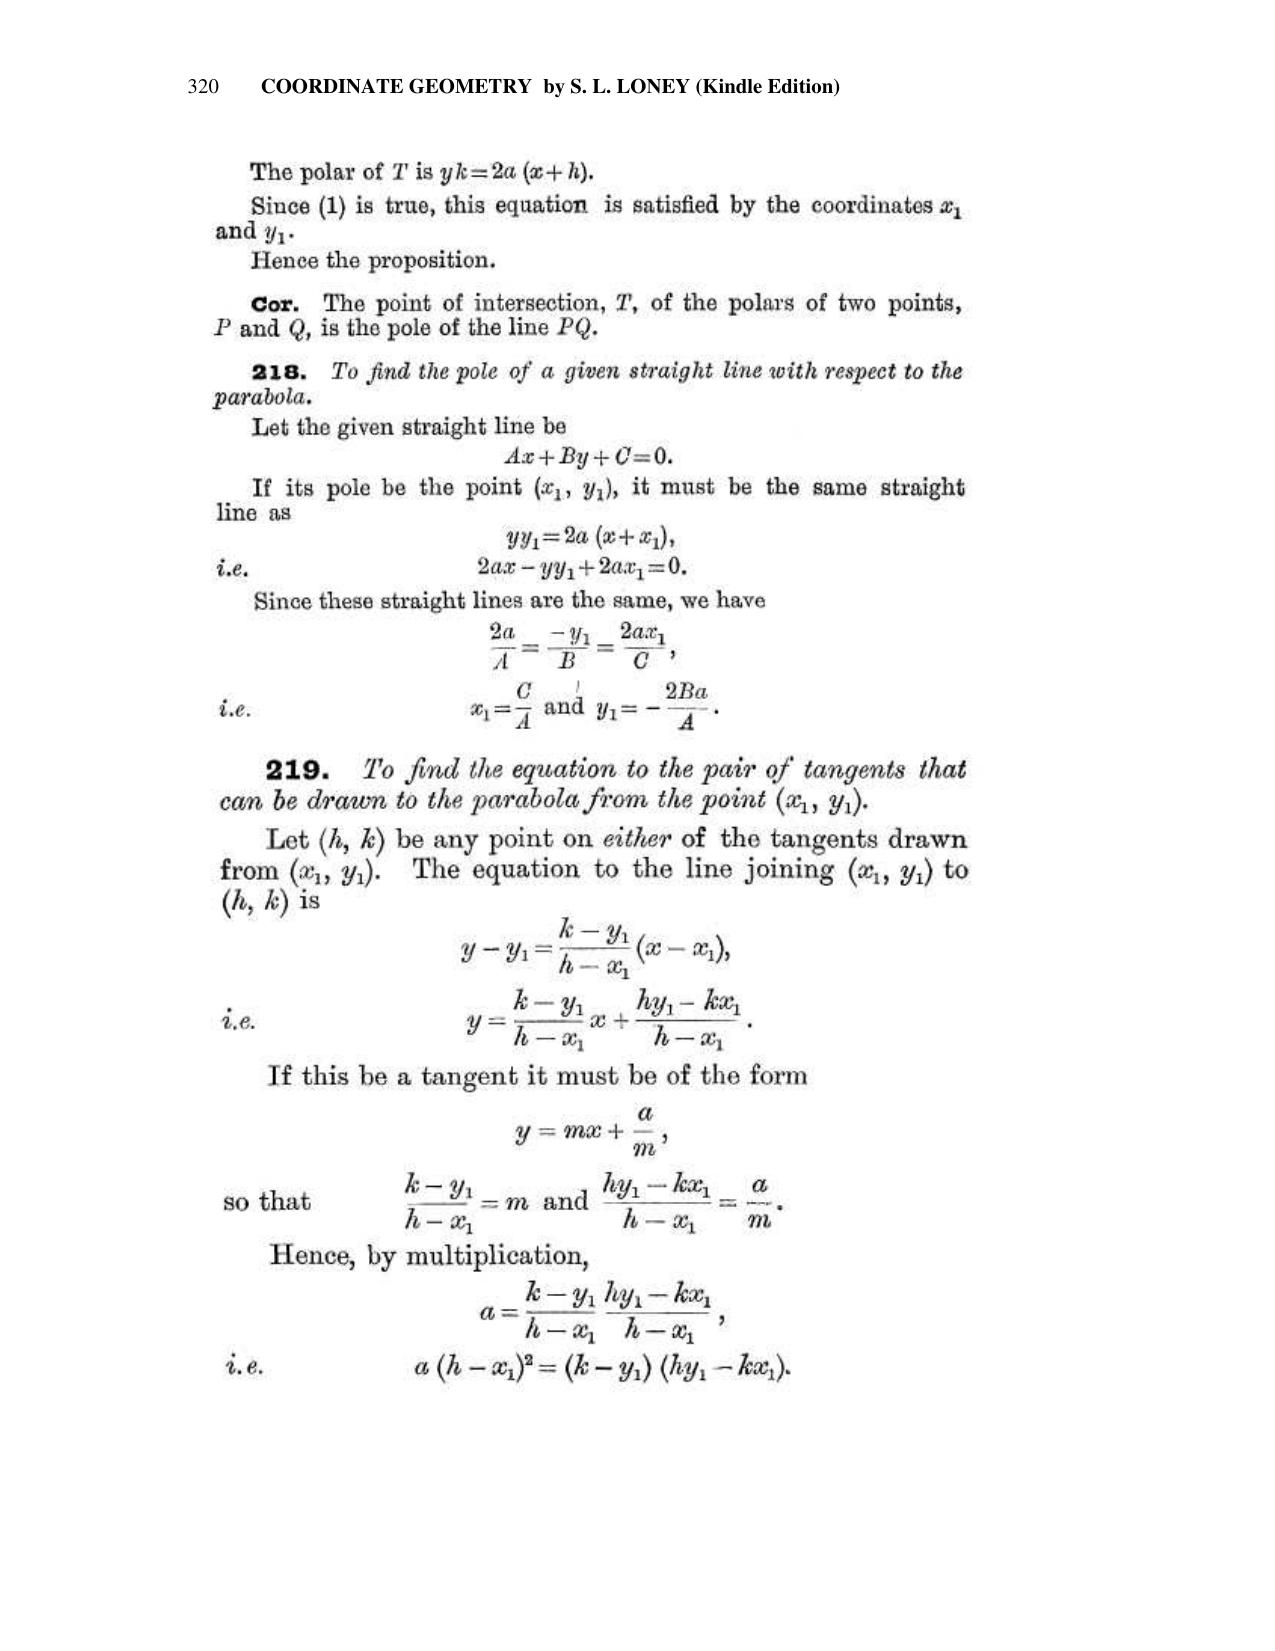 Chapter 10: The Parabola - SL Loney Solutions: The Elements of Coordinate Geometry - Page 34